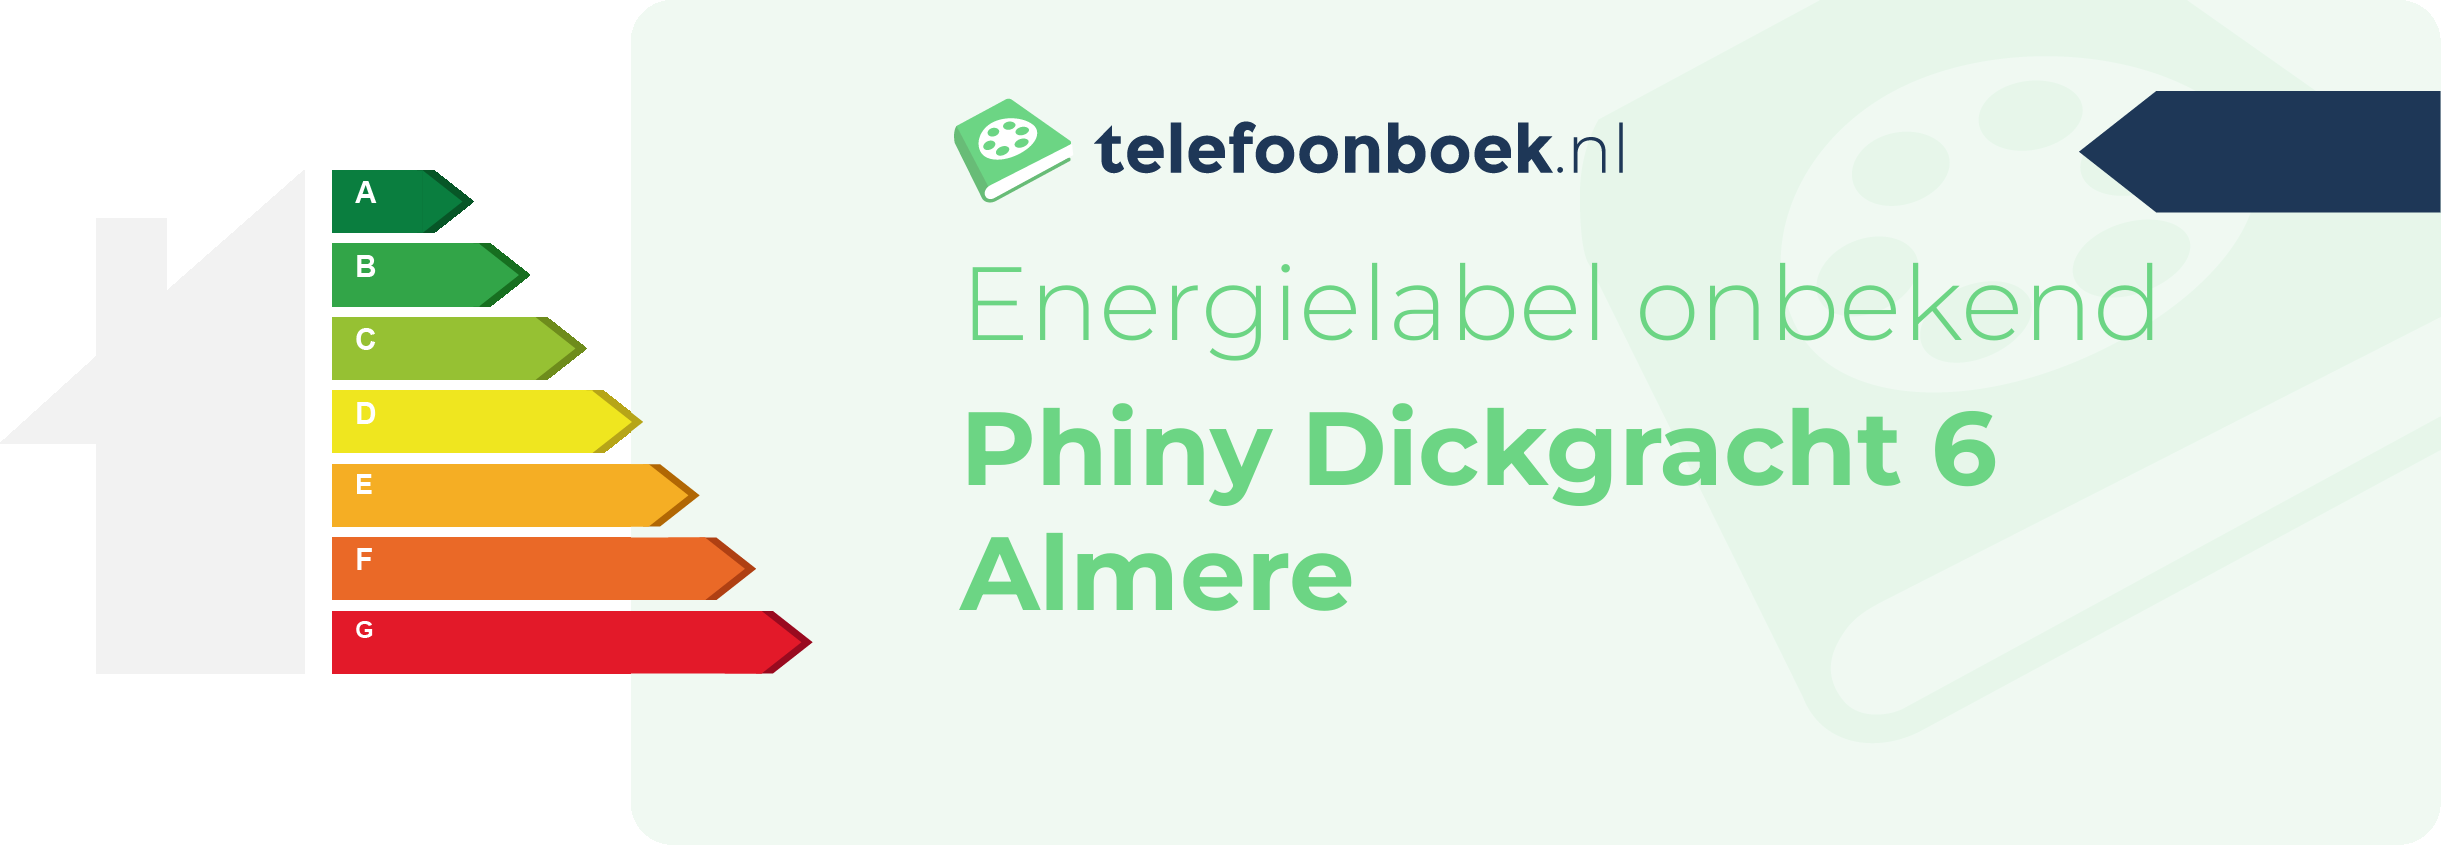 Energielabel Phiny Dickgracht 6 Almere